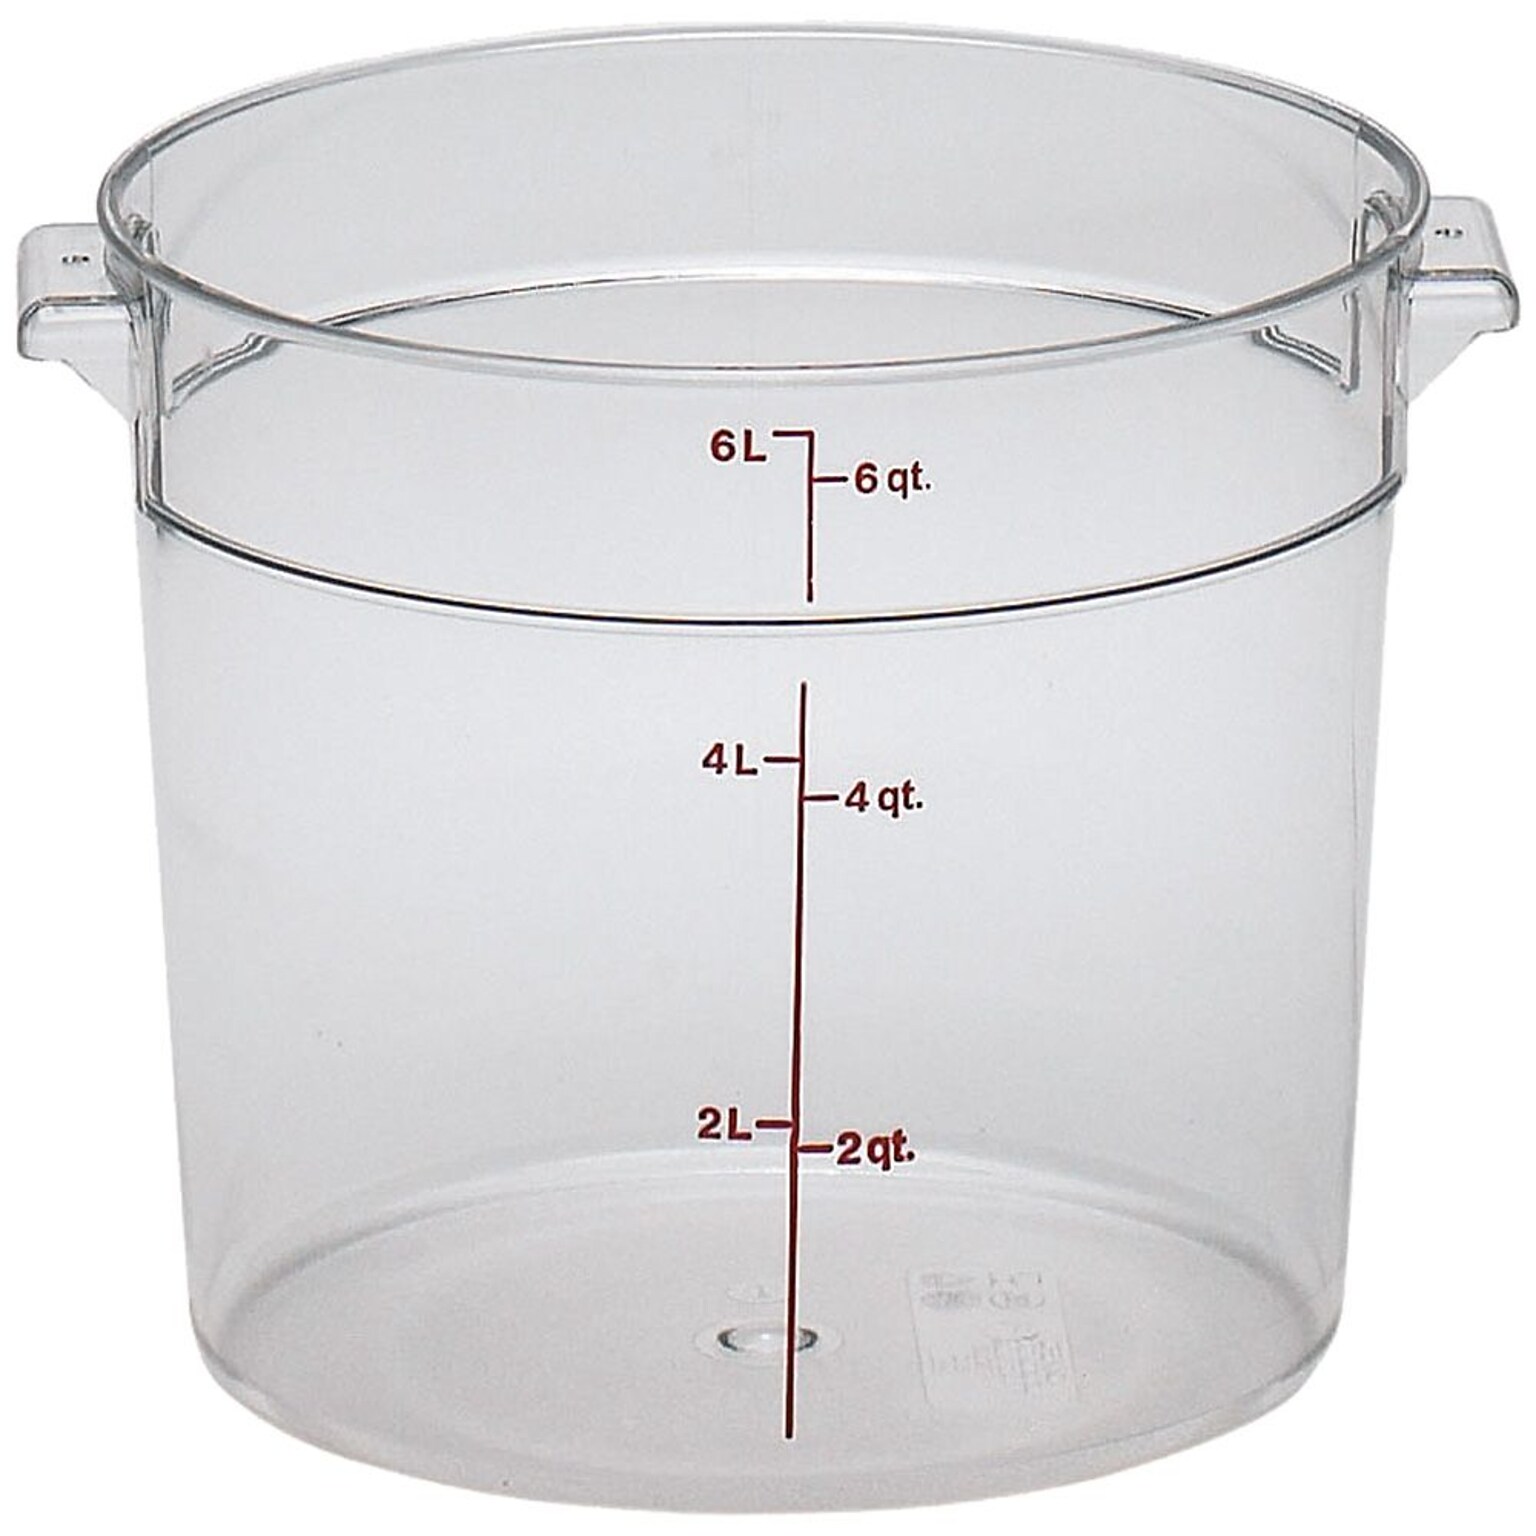 Cambro Camwear Polycarbonate Round Food Storage Container, 6 Quart (RFSCW6)